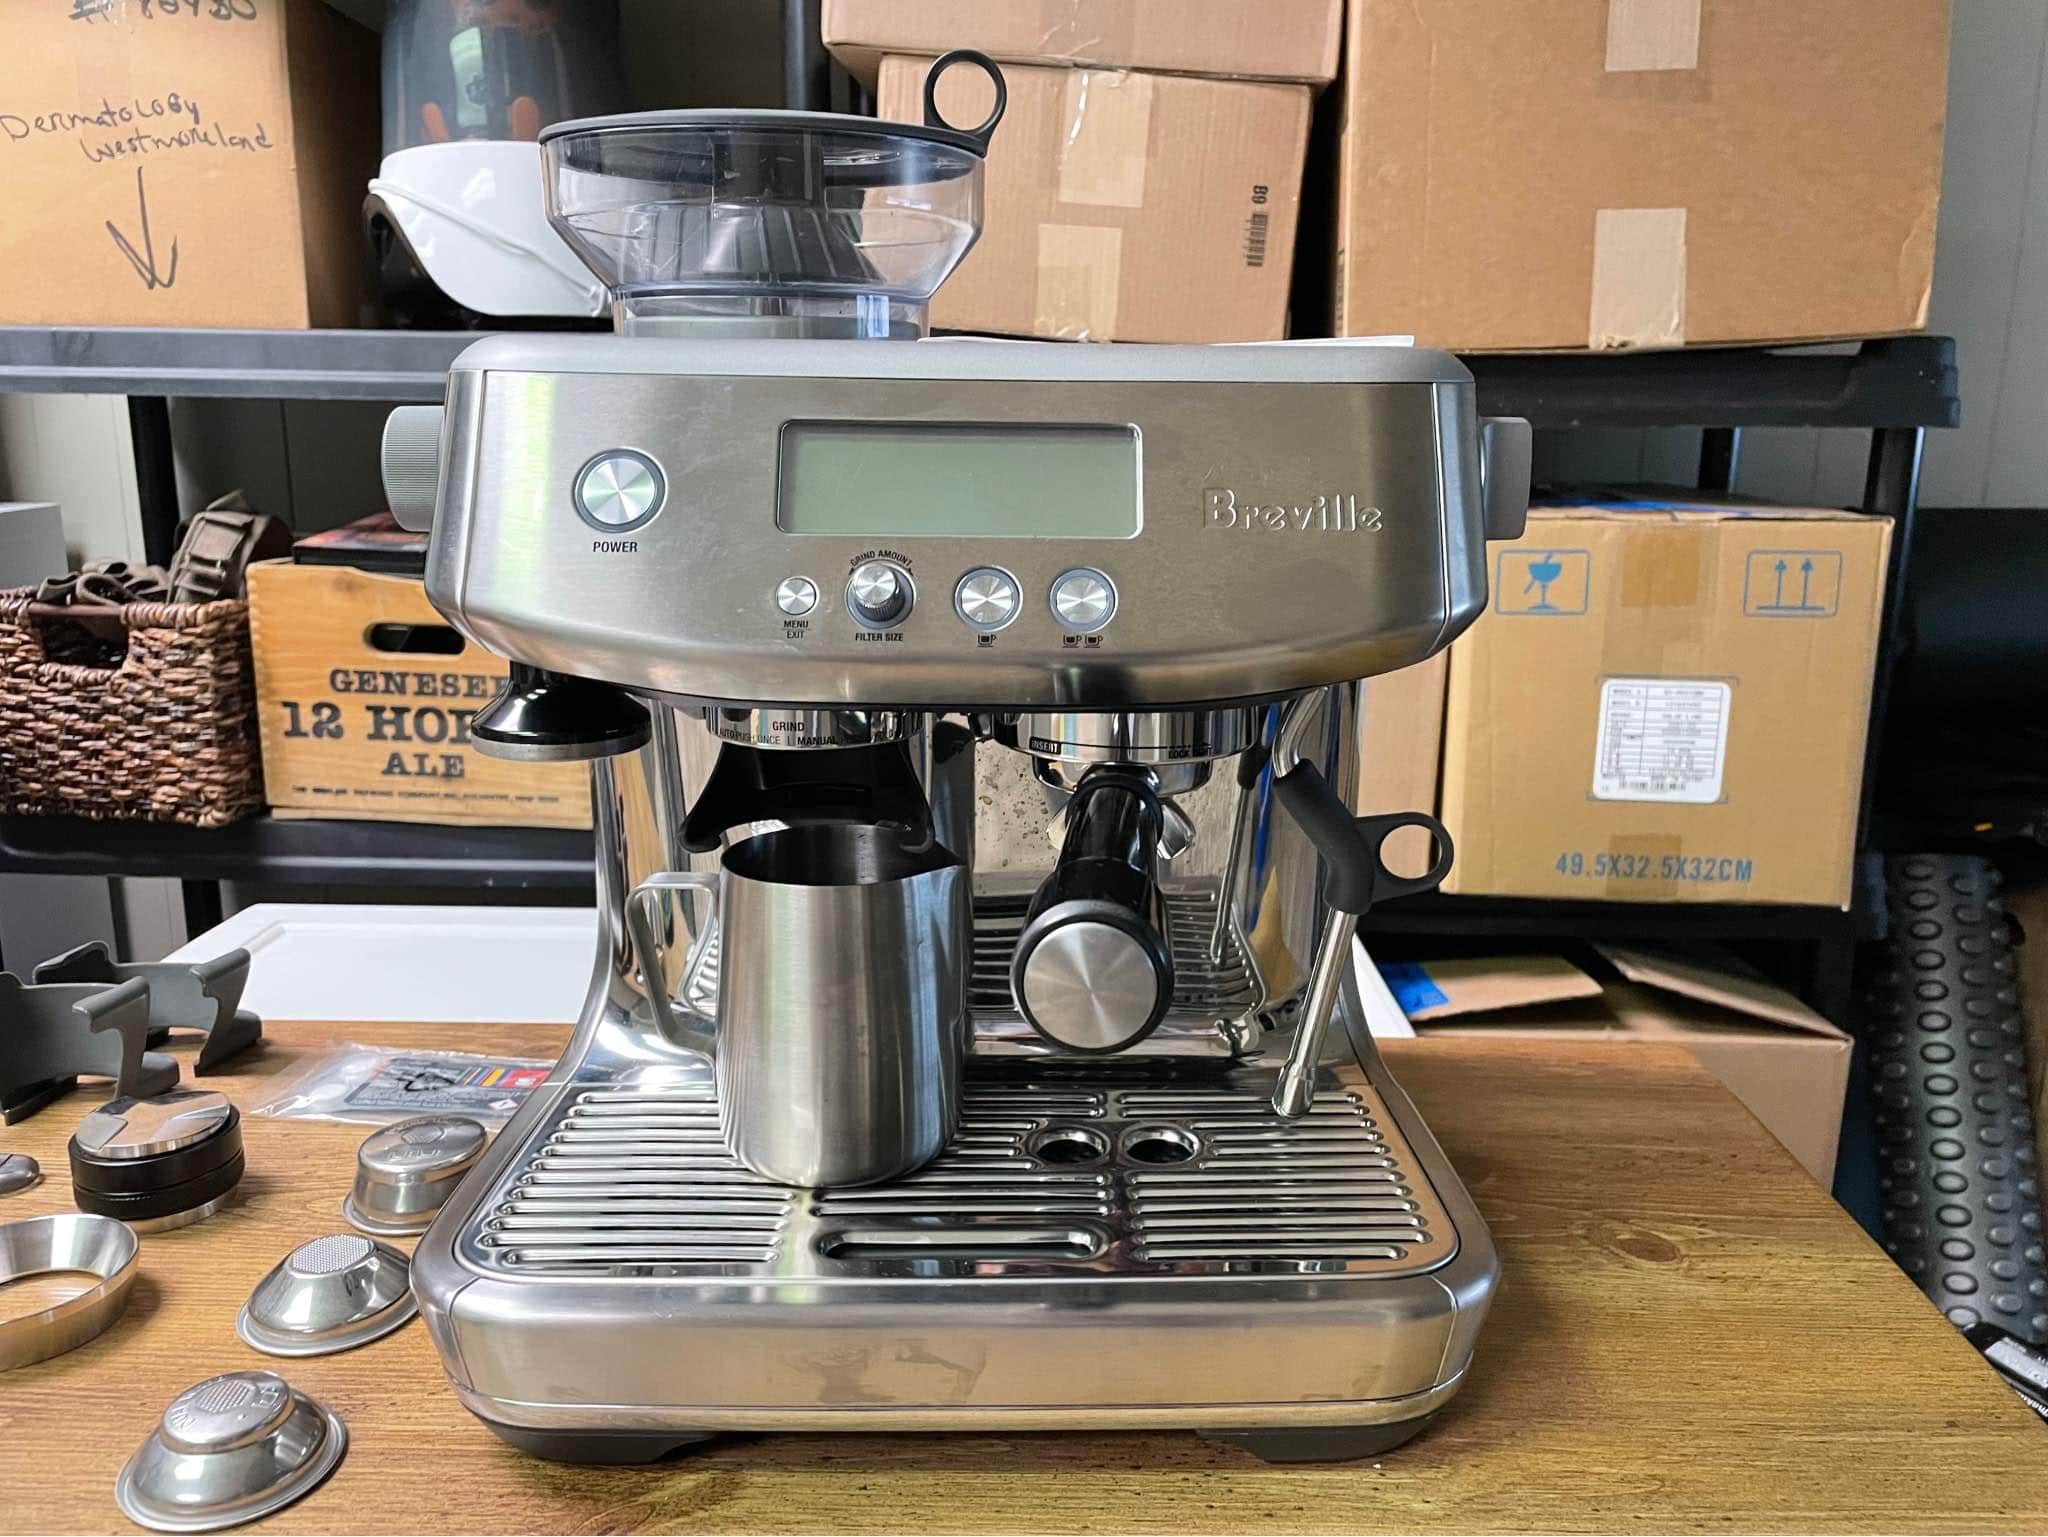 The Steam Wand of the Barista Pro is faster, quieter, and more customizable